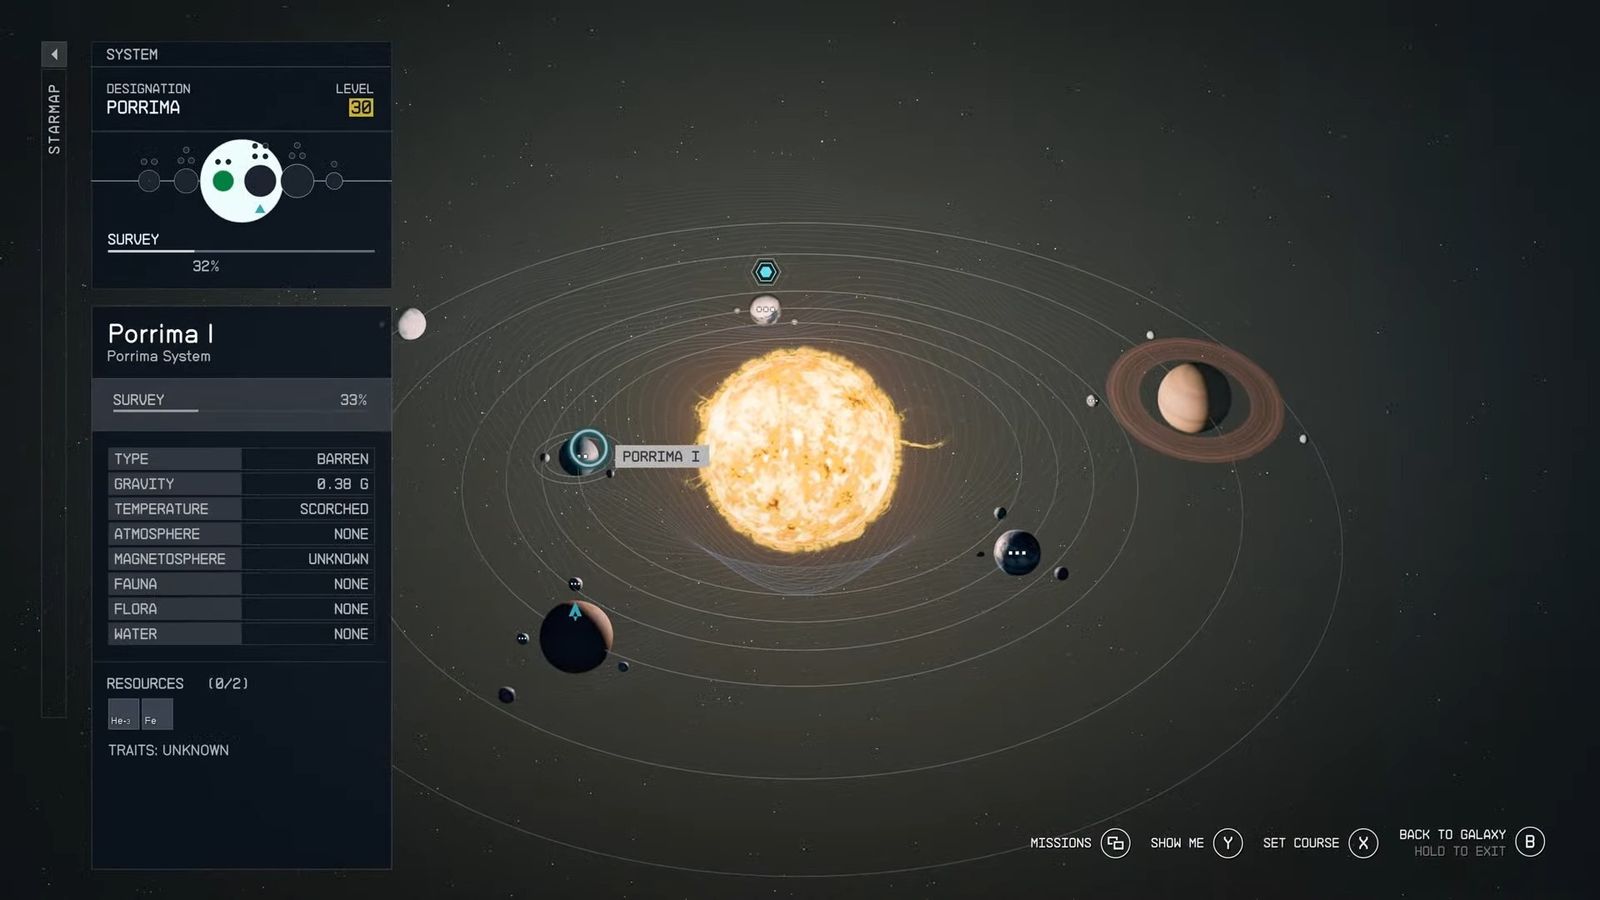 Planets shown on a map